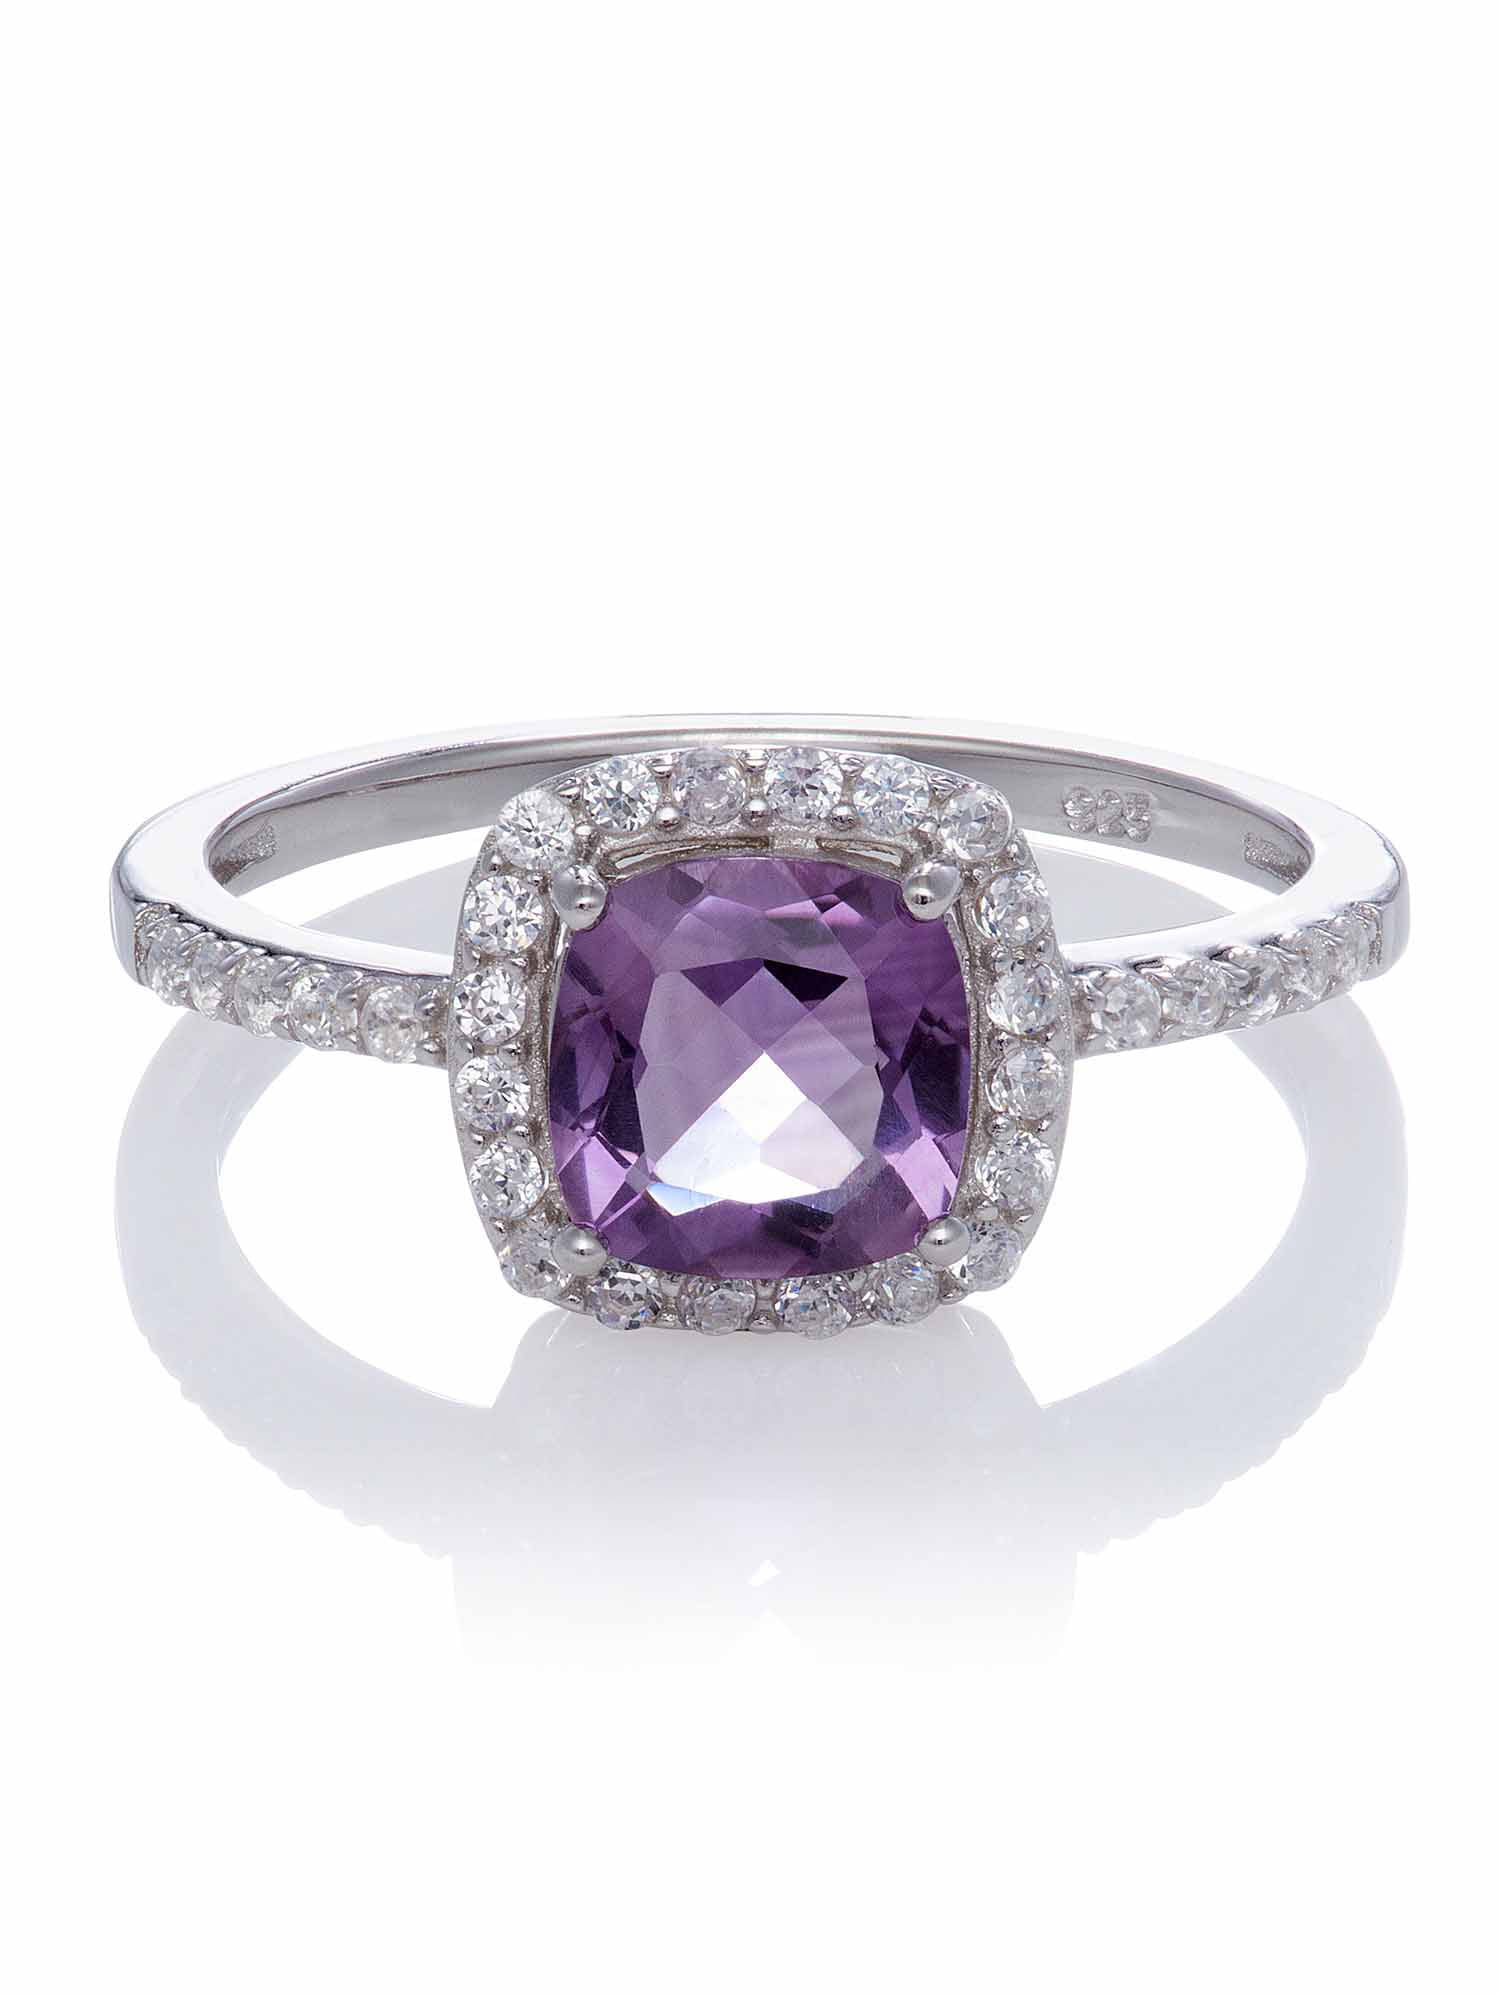 Amethyst Cushion-Cut with Created White Sapphire Ring, Size 7 - Walmart.com